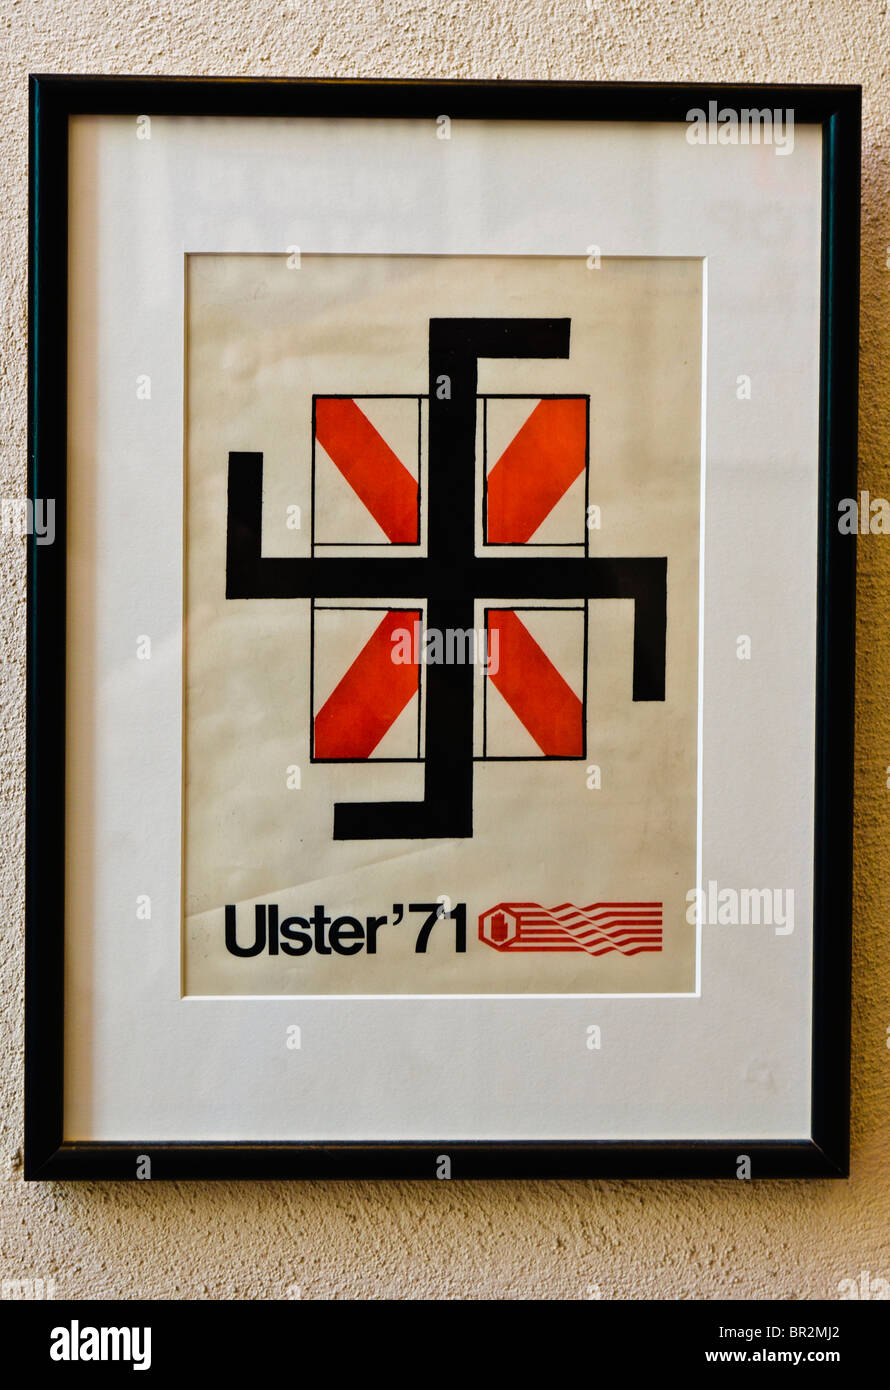 Ulster '71 poster which suggested that the festival, supposed to be a celebration of Northern Ireland, promoted fascist ideals marginalising Catholics Stock Photo